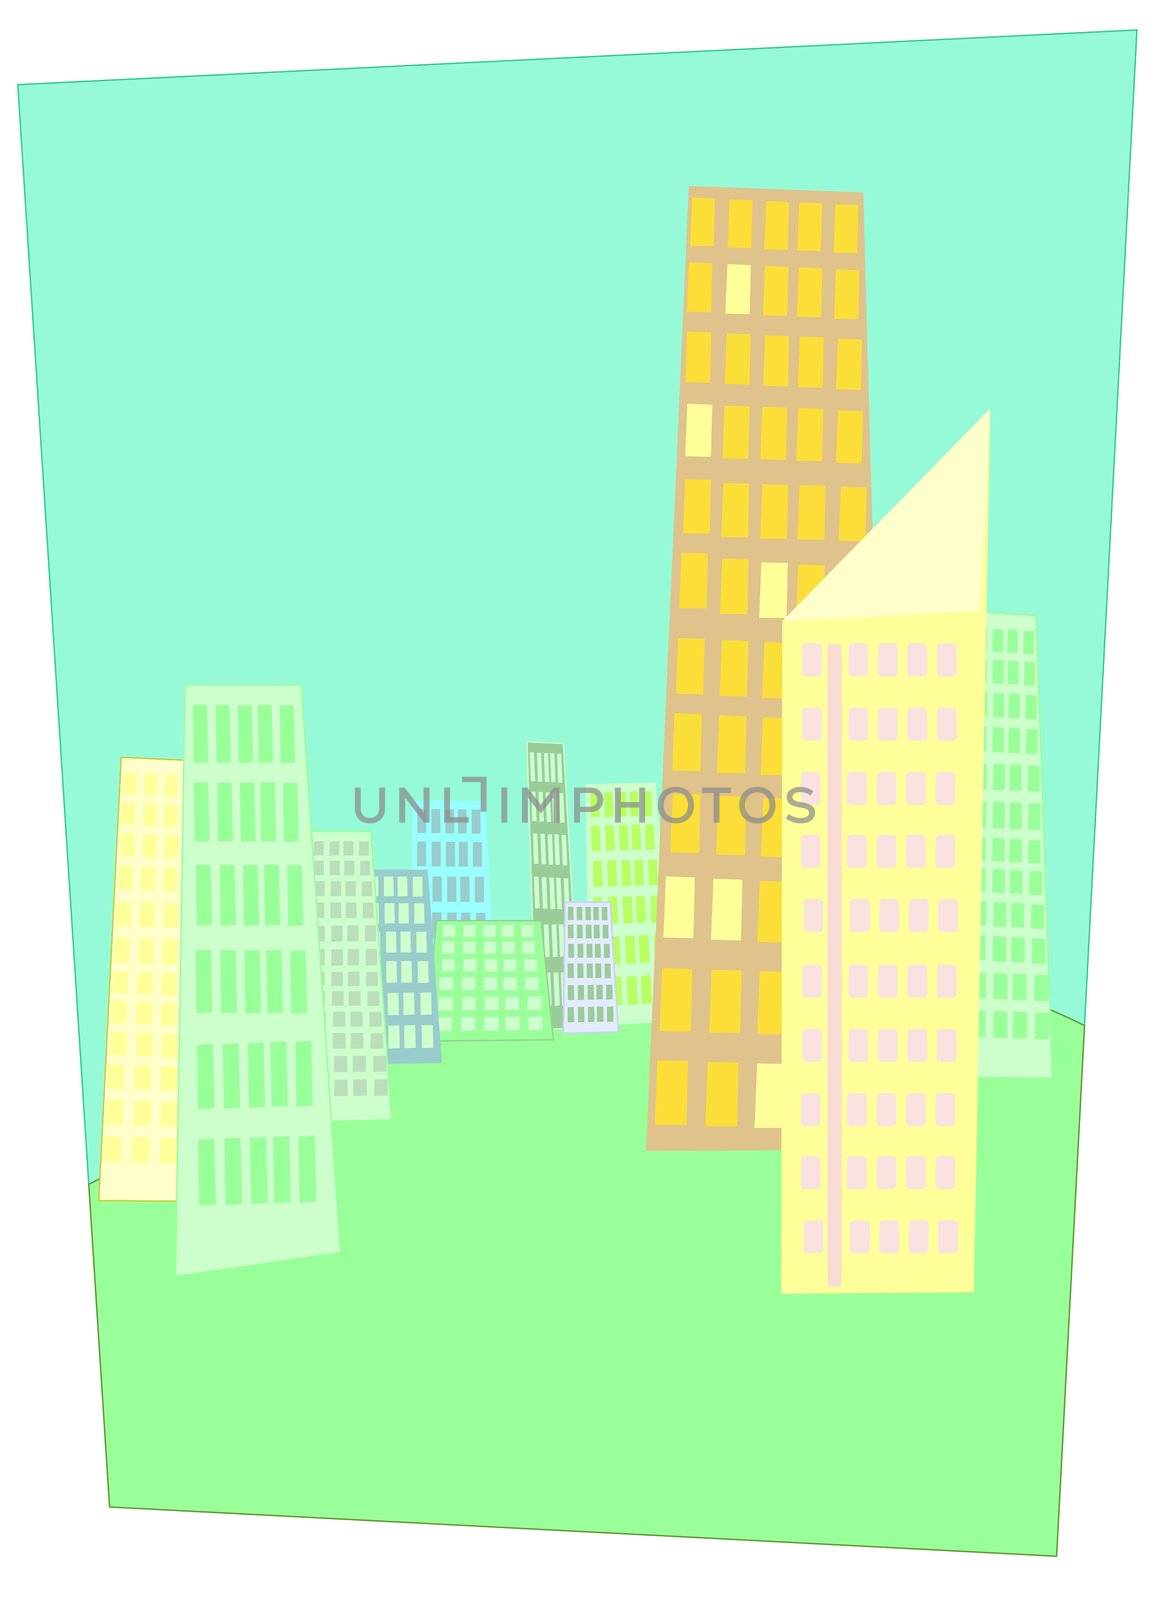 Illustration of a city with skyscrapers in springtime colors